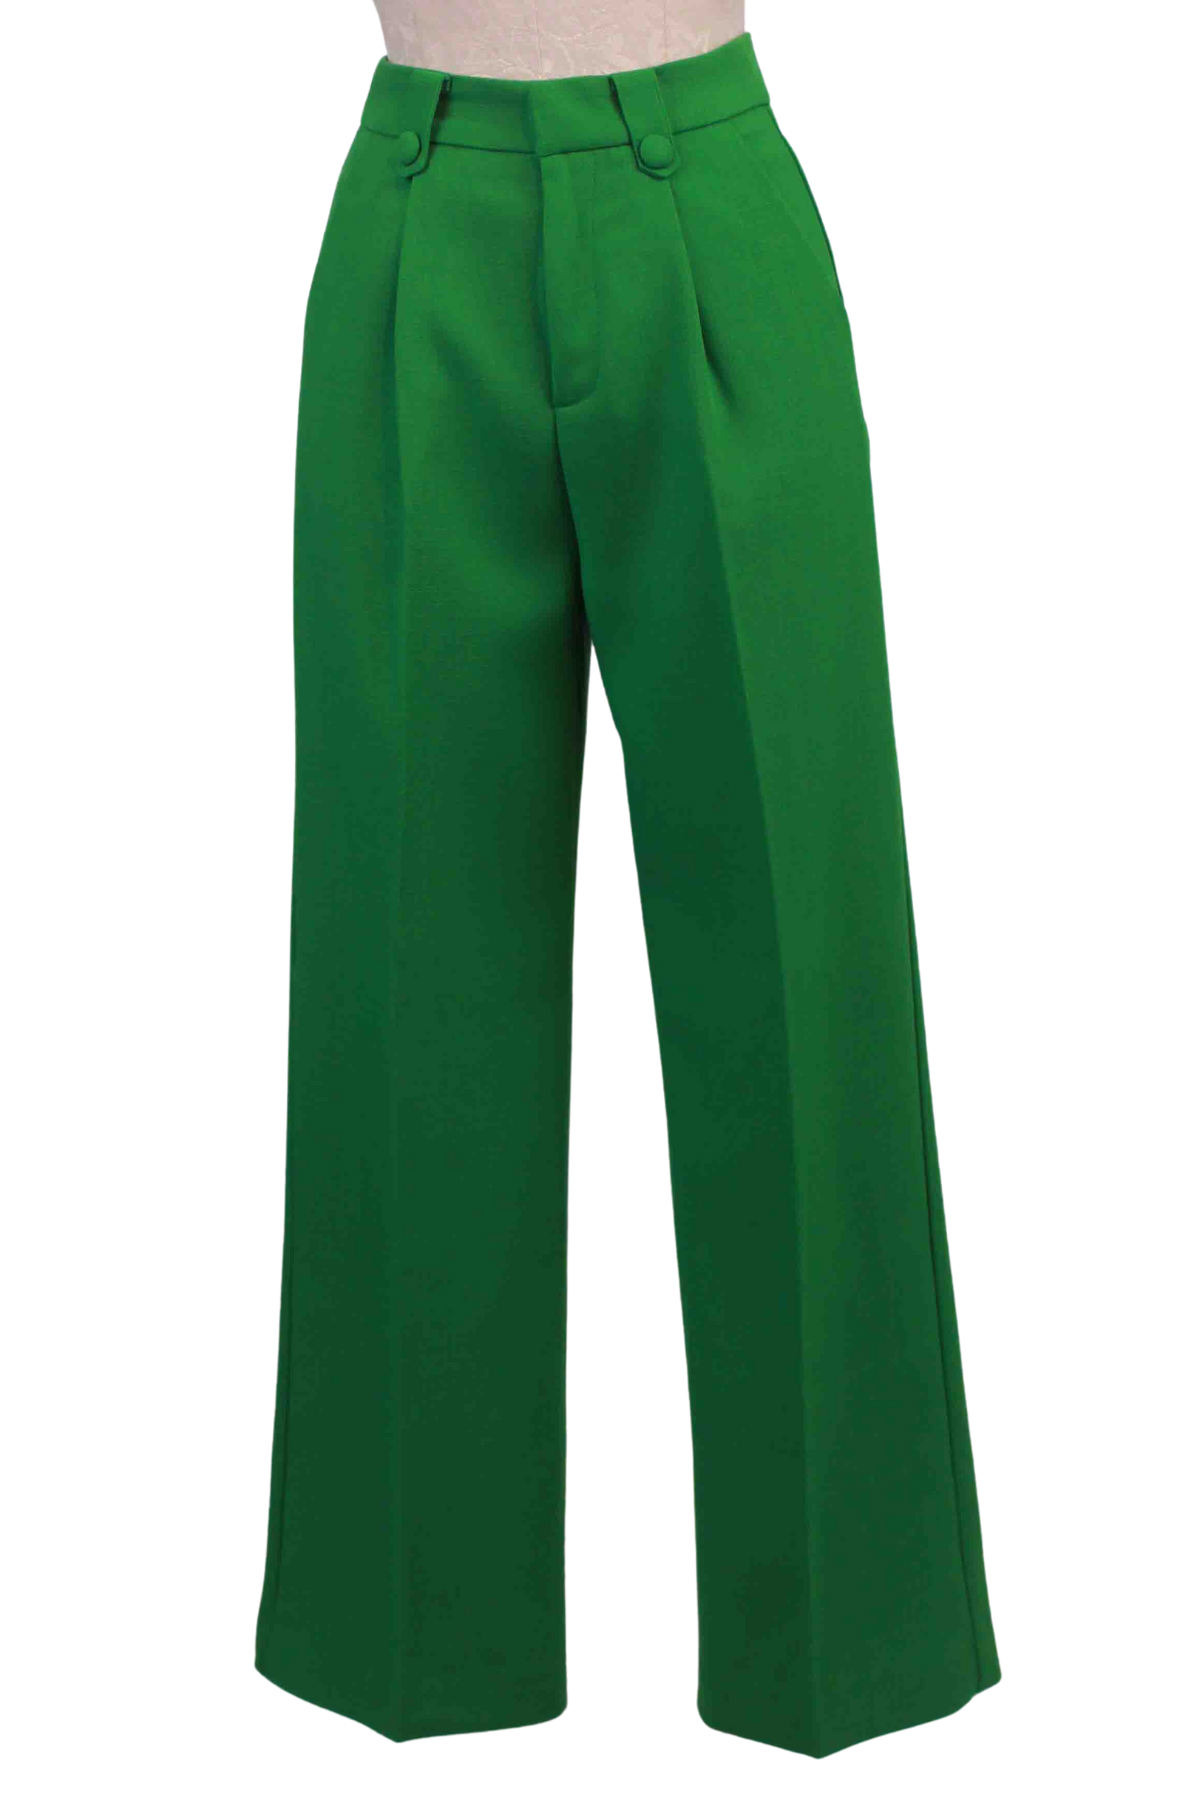 Green Pleated Front Marly Pant by Grace and Mila